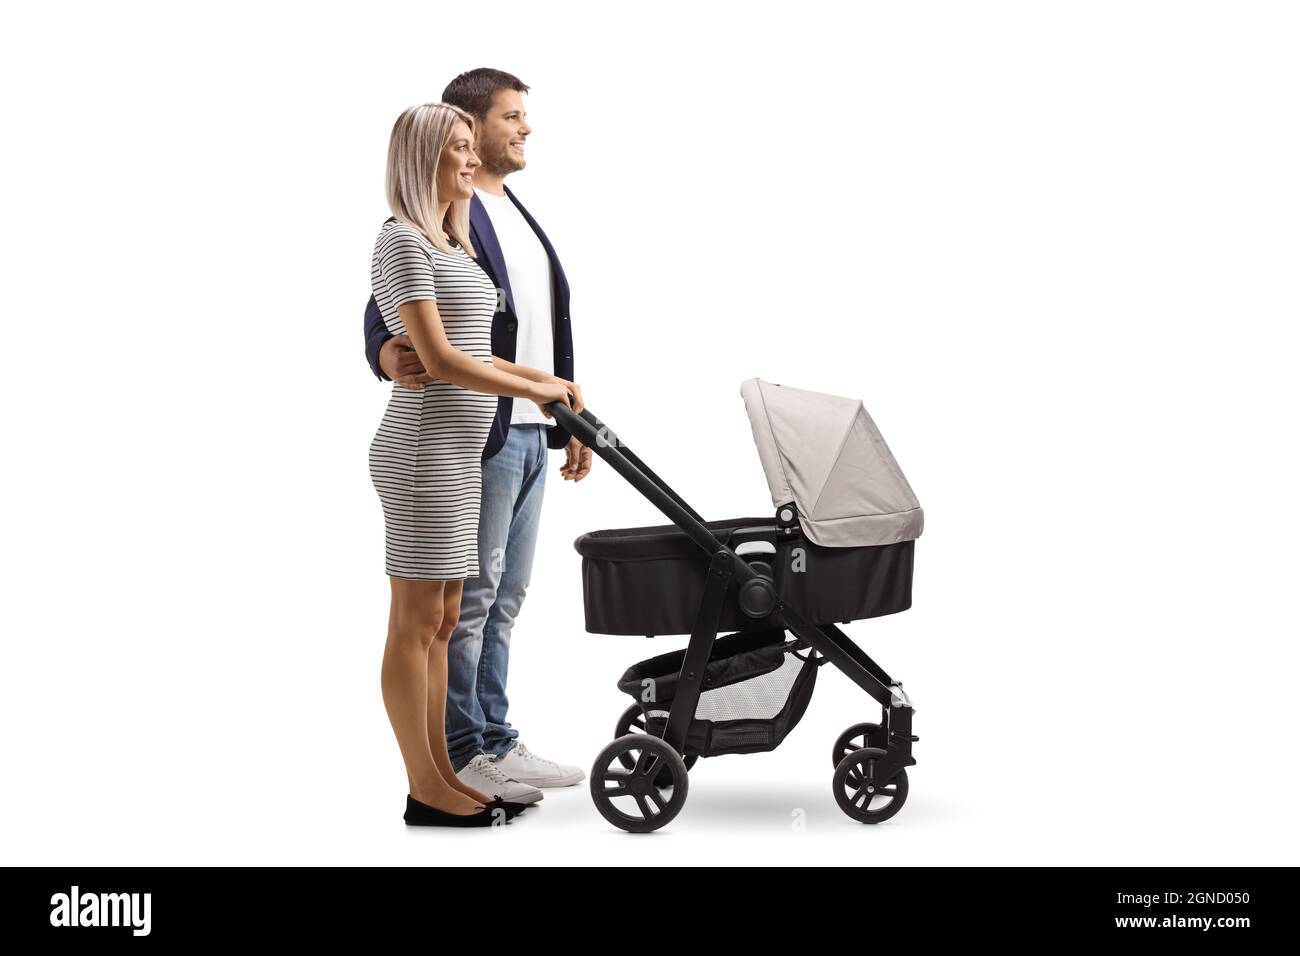 Full length profile shot of a young couple standing with a baby stroller isolated on white background Stock Photo